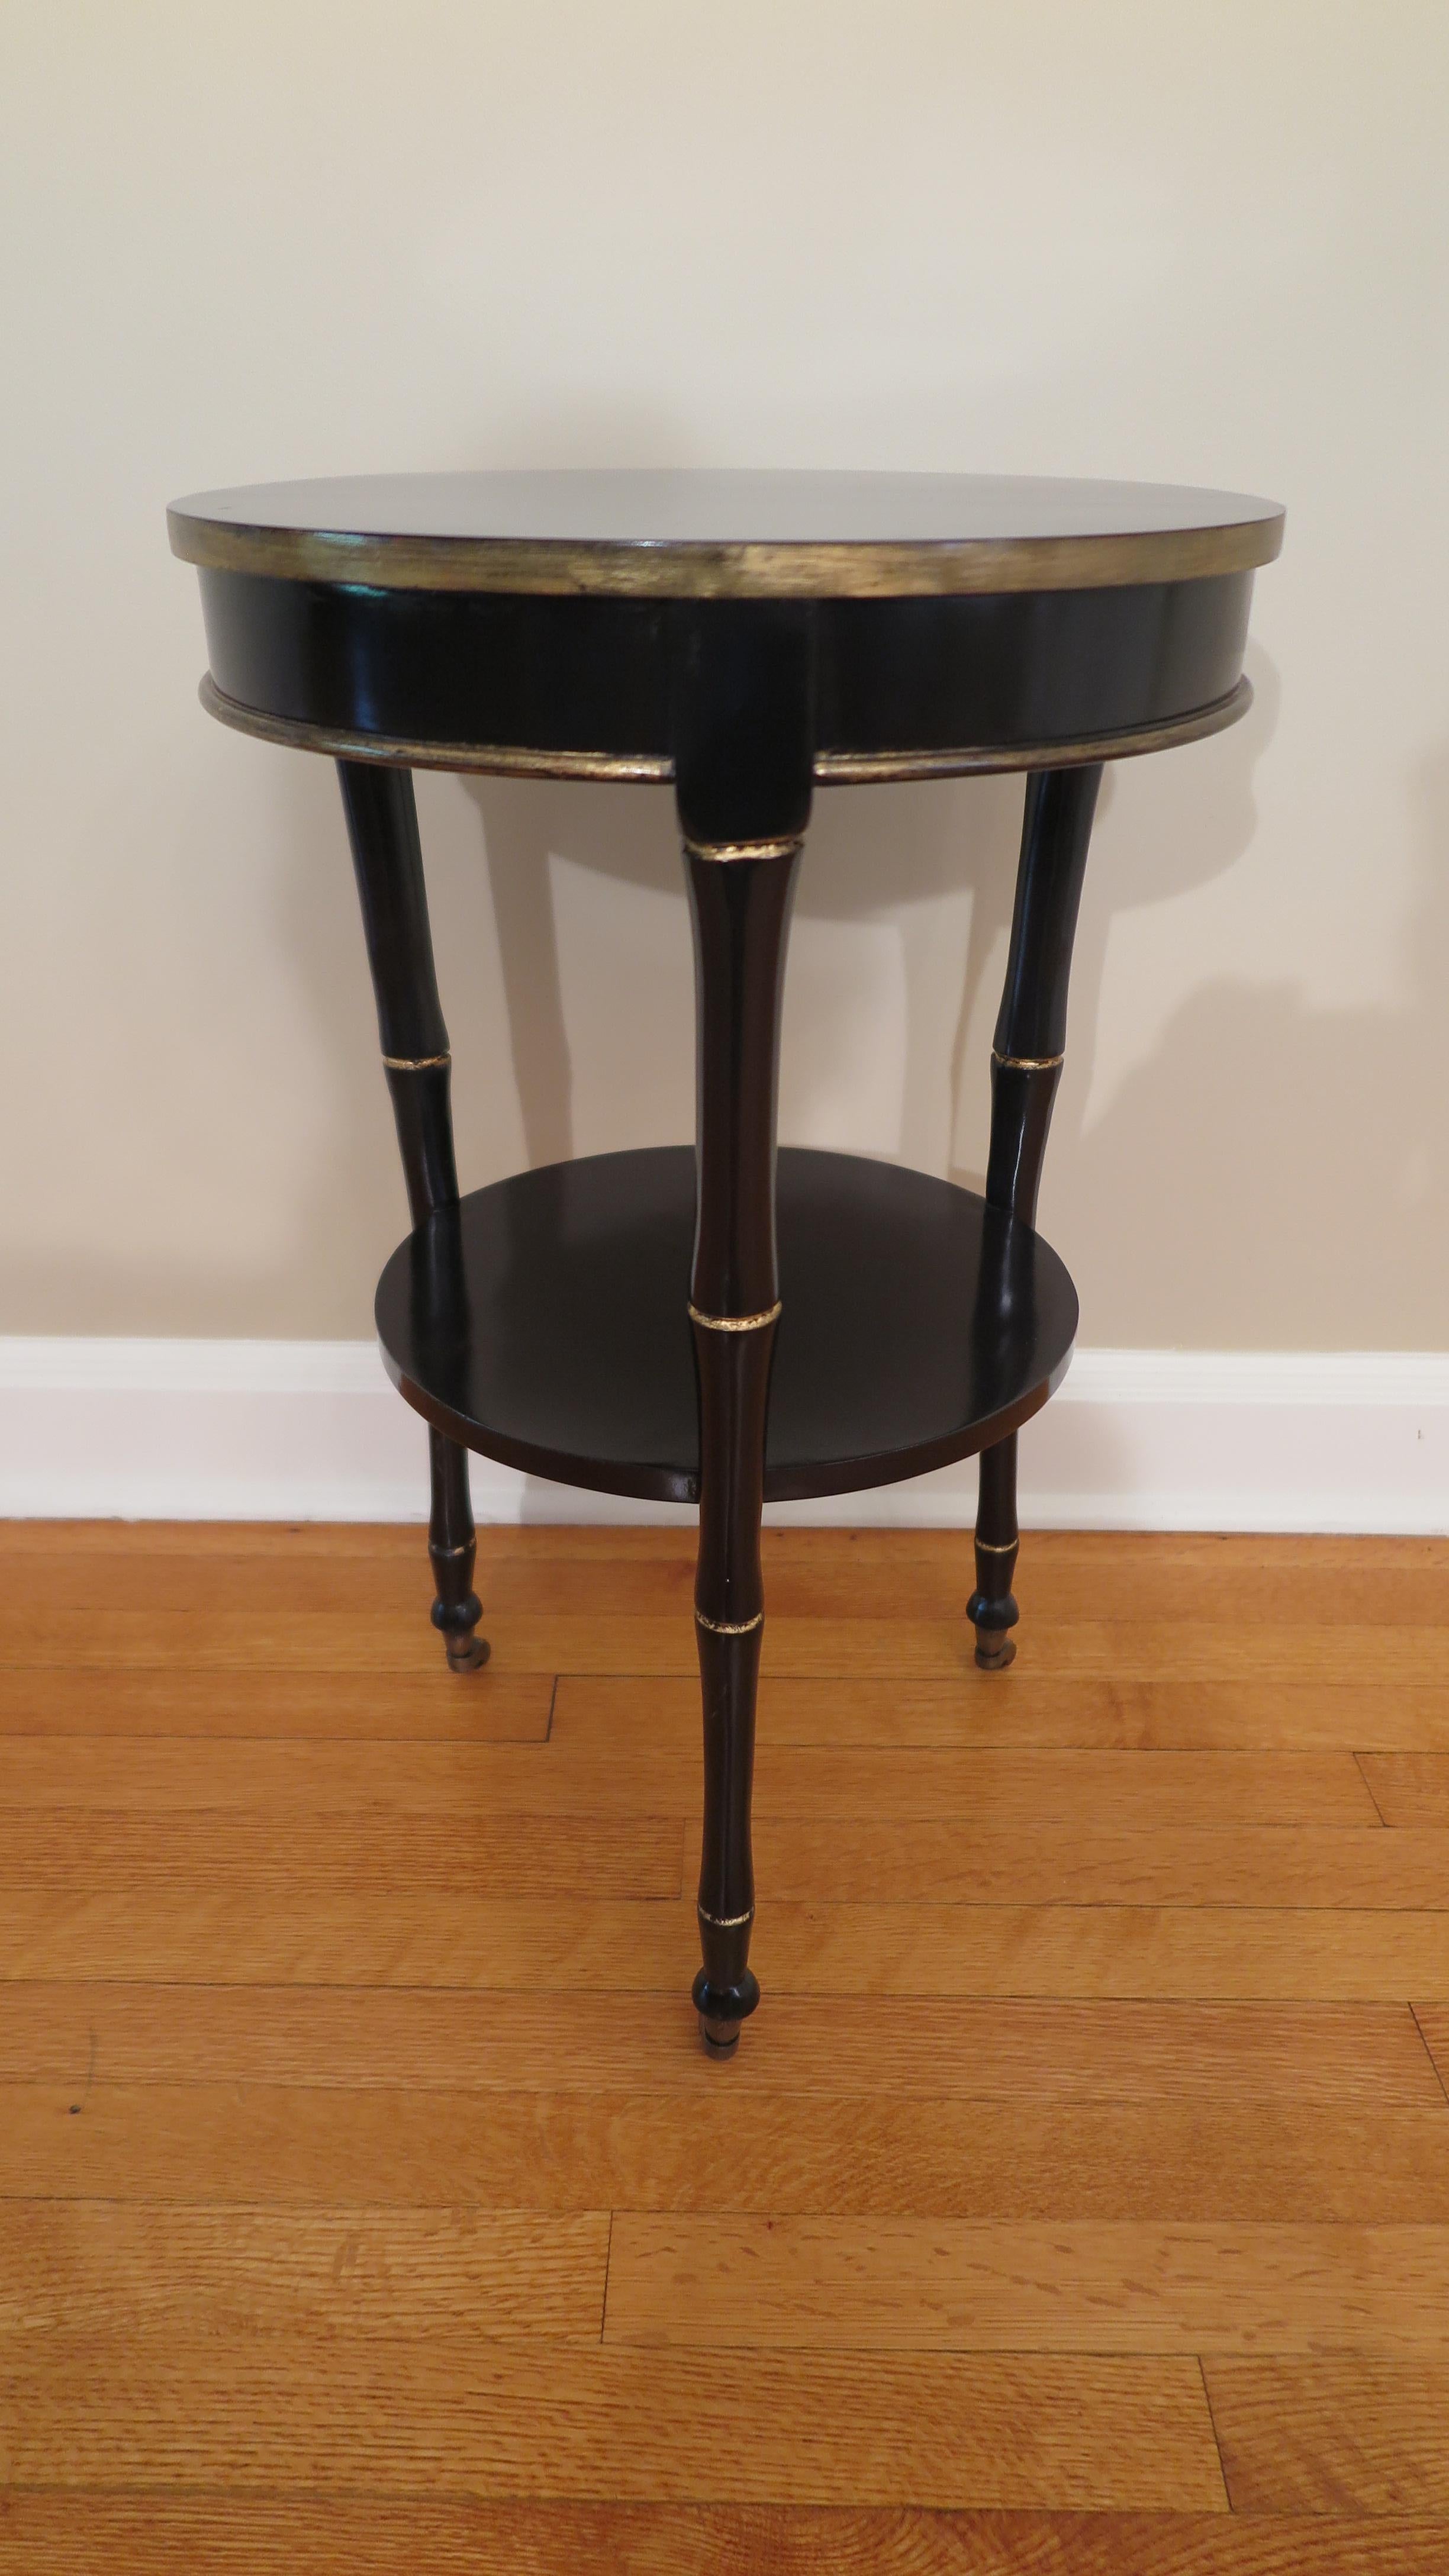 Elegant black lacquer gueridon side table. Exceptional side table having three legs shaped as bamboo with a lower shelf as strut, gilt detail accents and caster feet. Finely crafted table of high quality. Classic elegance. Very good to excellent